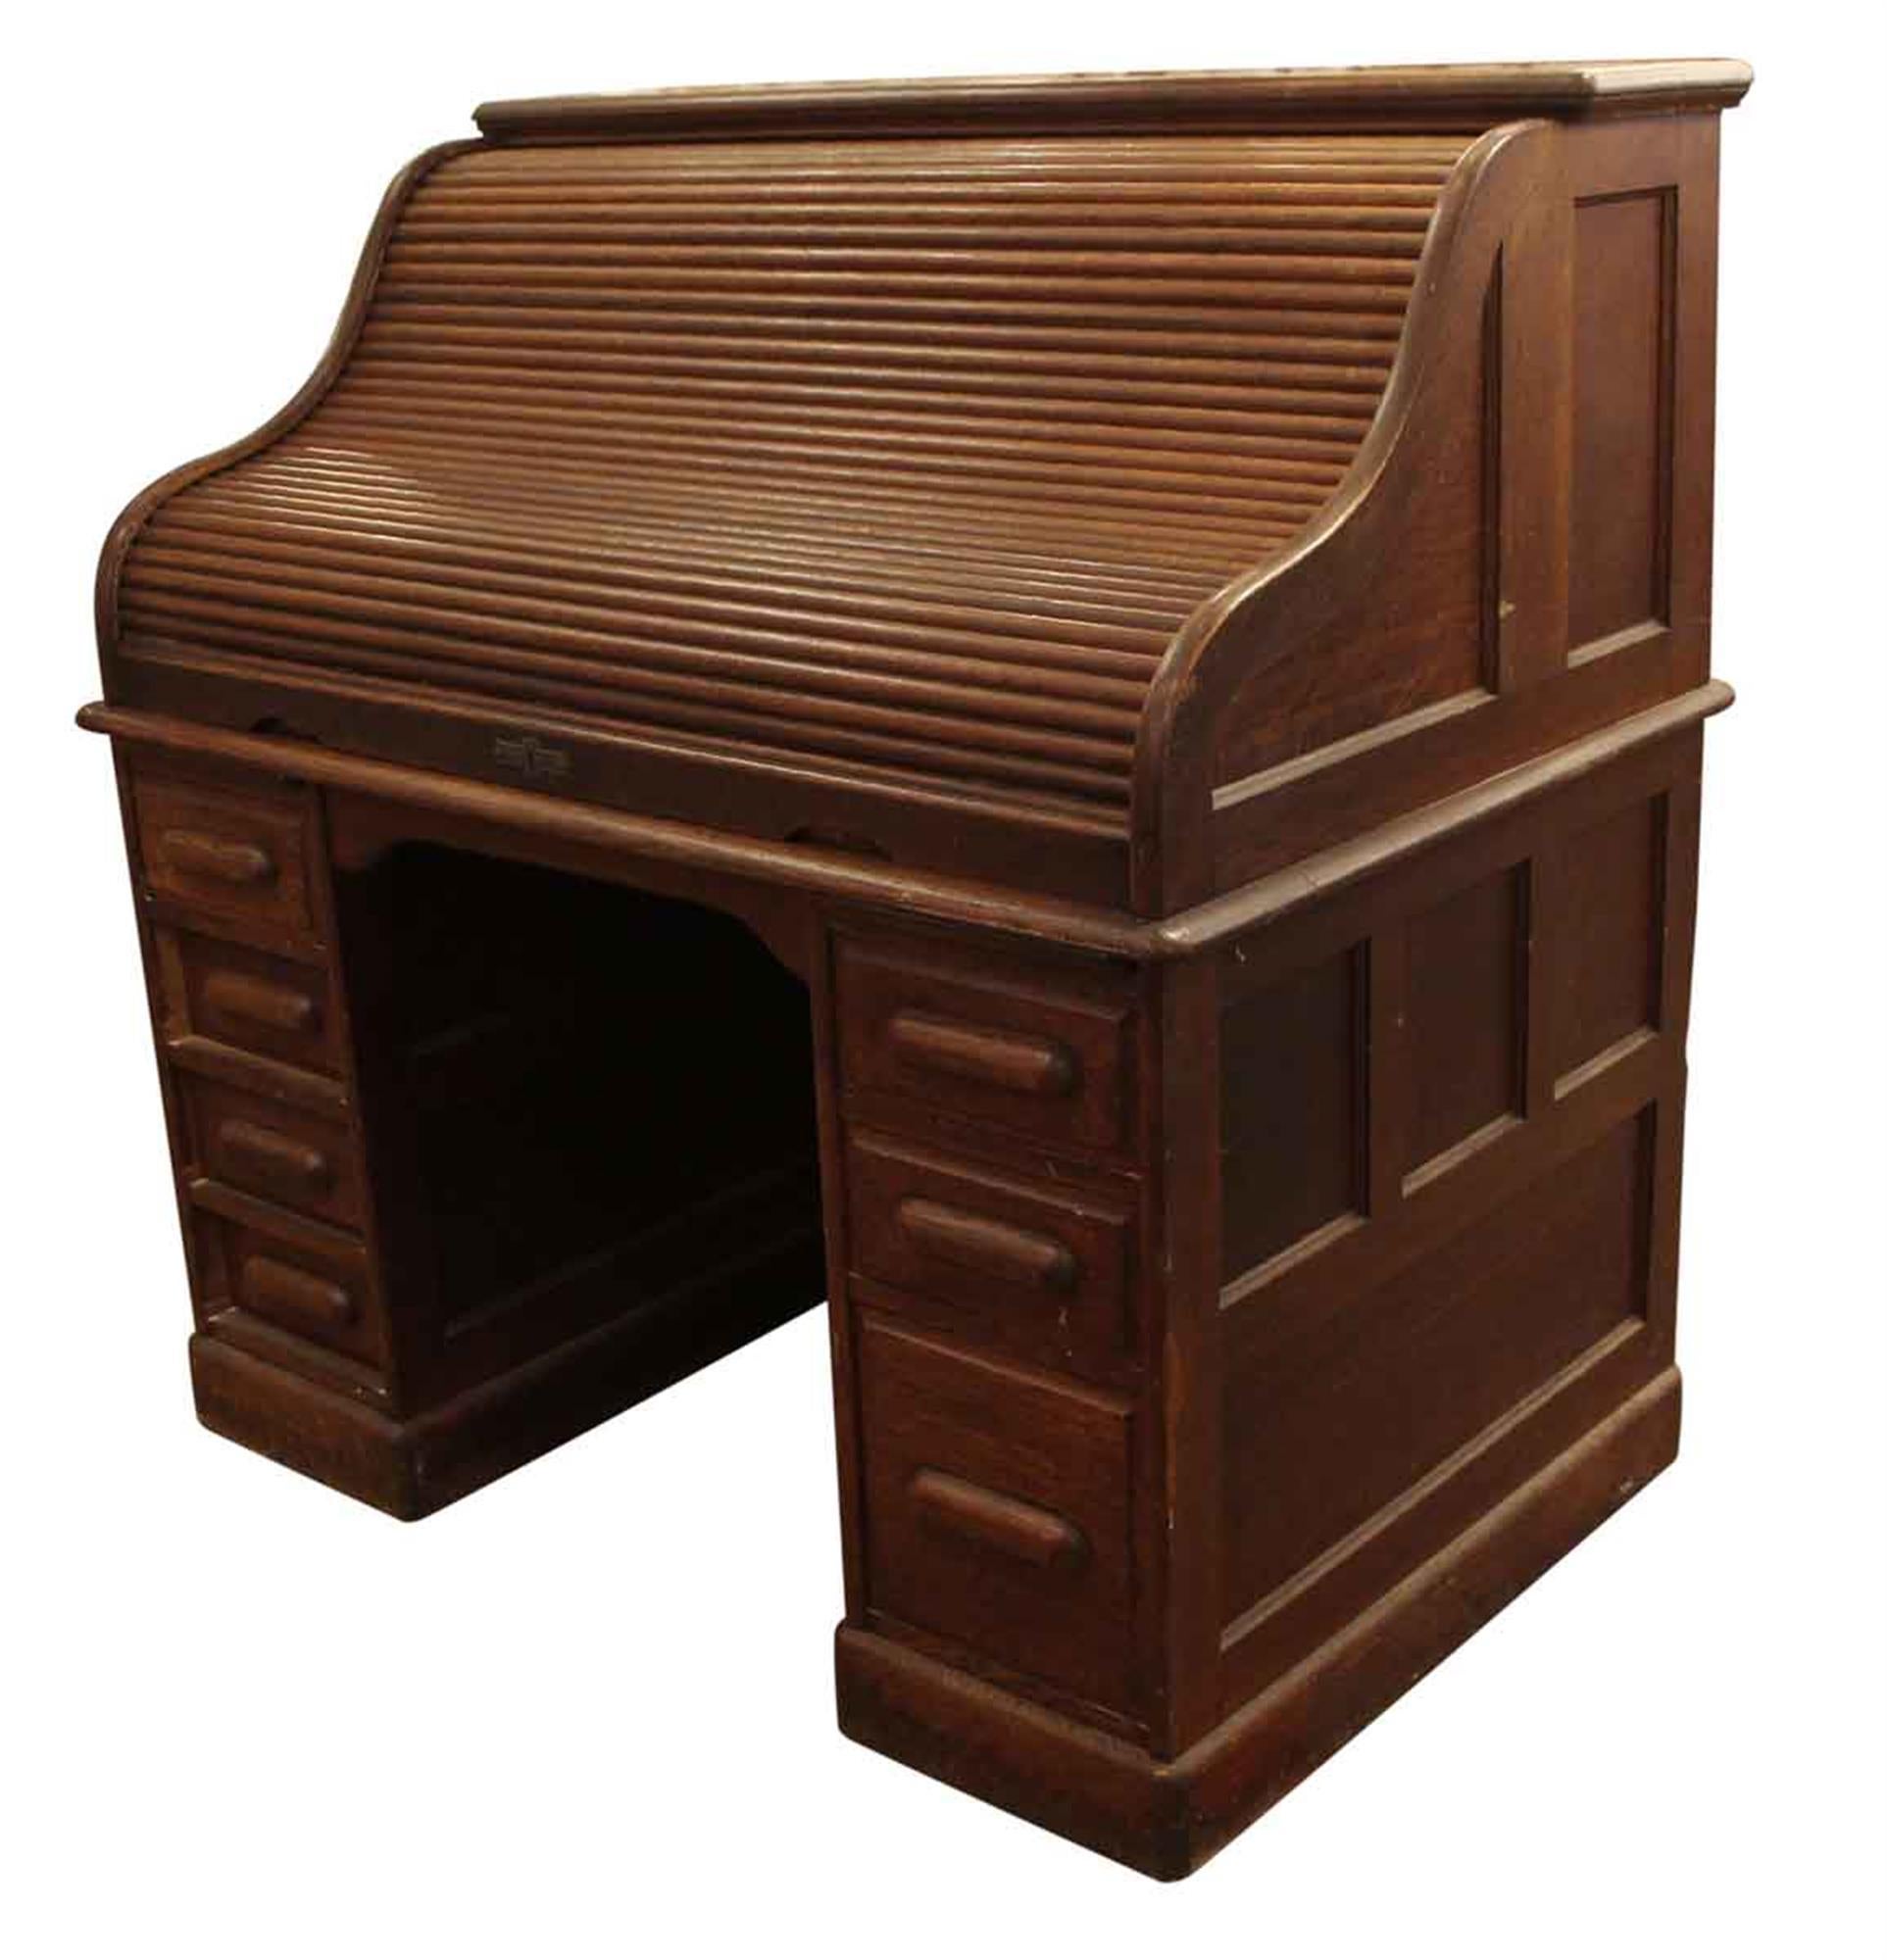 Seven drawer dark wood tone roll top desk with extra inside storage and cubbyholes from the 1880s. This can be seen at our 2420 Broadway location in the upper west side in Manhattan.